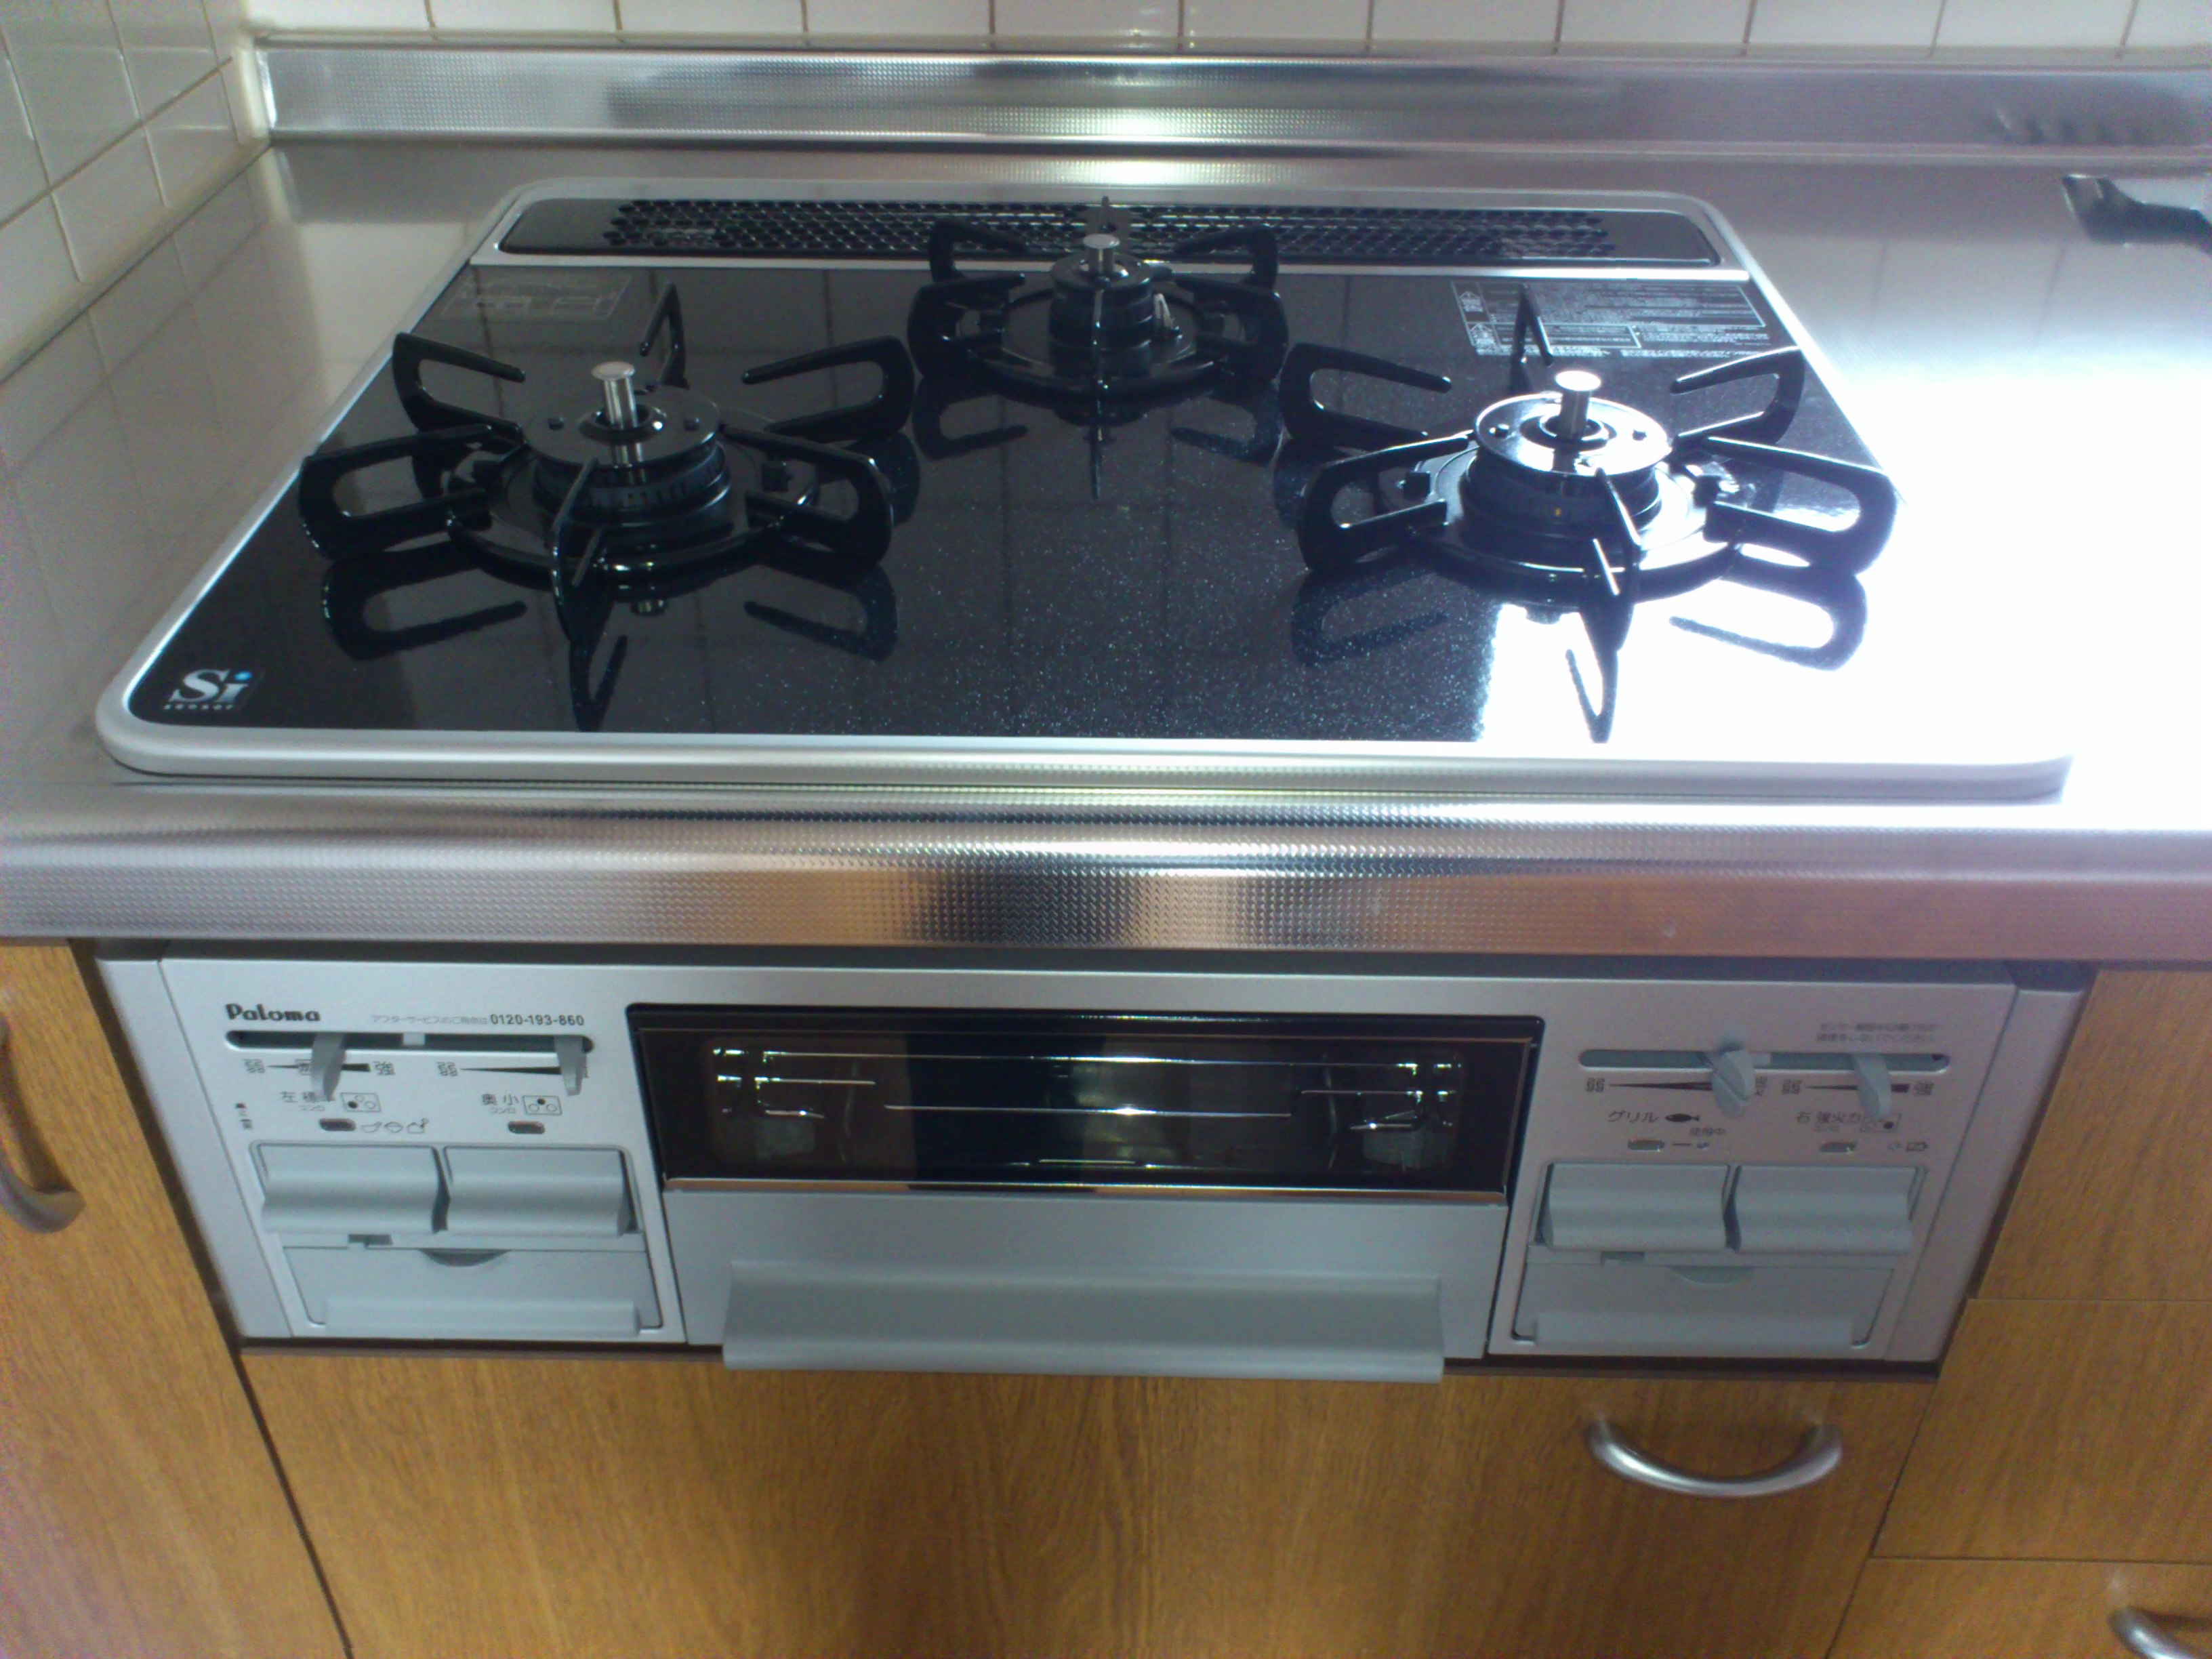 Other Equipment. Gas stove is a new article. (unused)